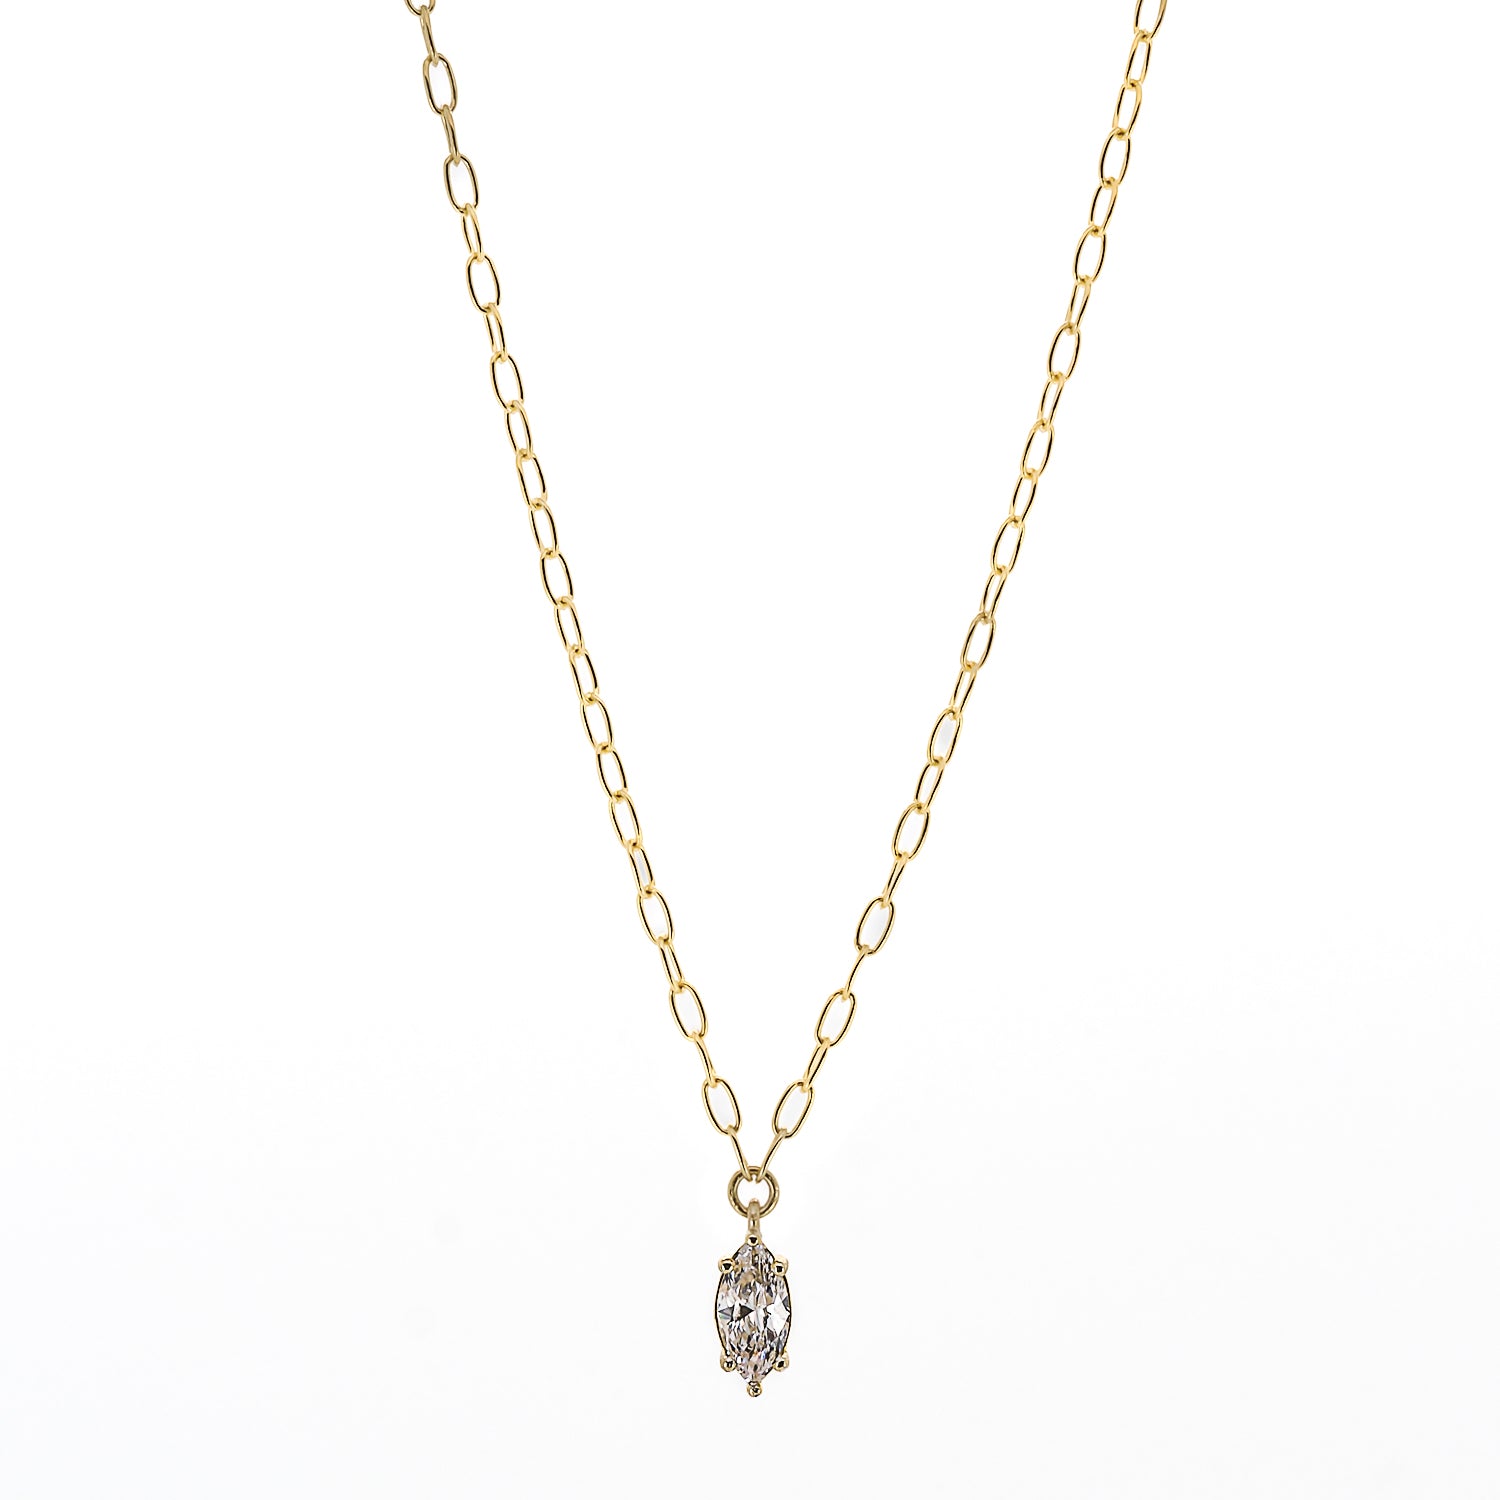 The Gold and Diamond Chain Necklace, a thoughtful and meaningful gift that exudes luxury and charm.